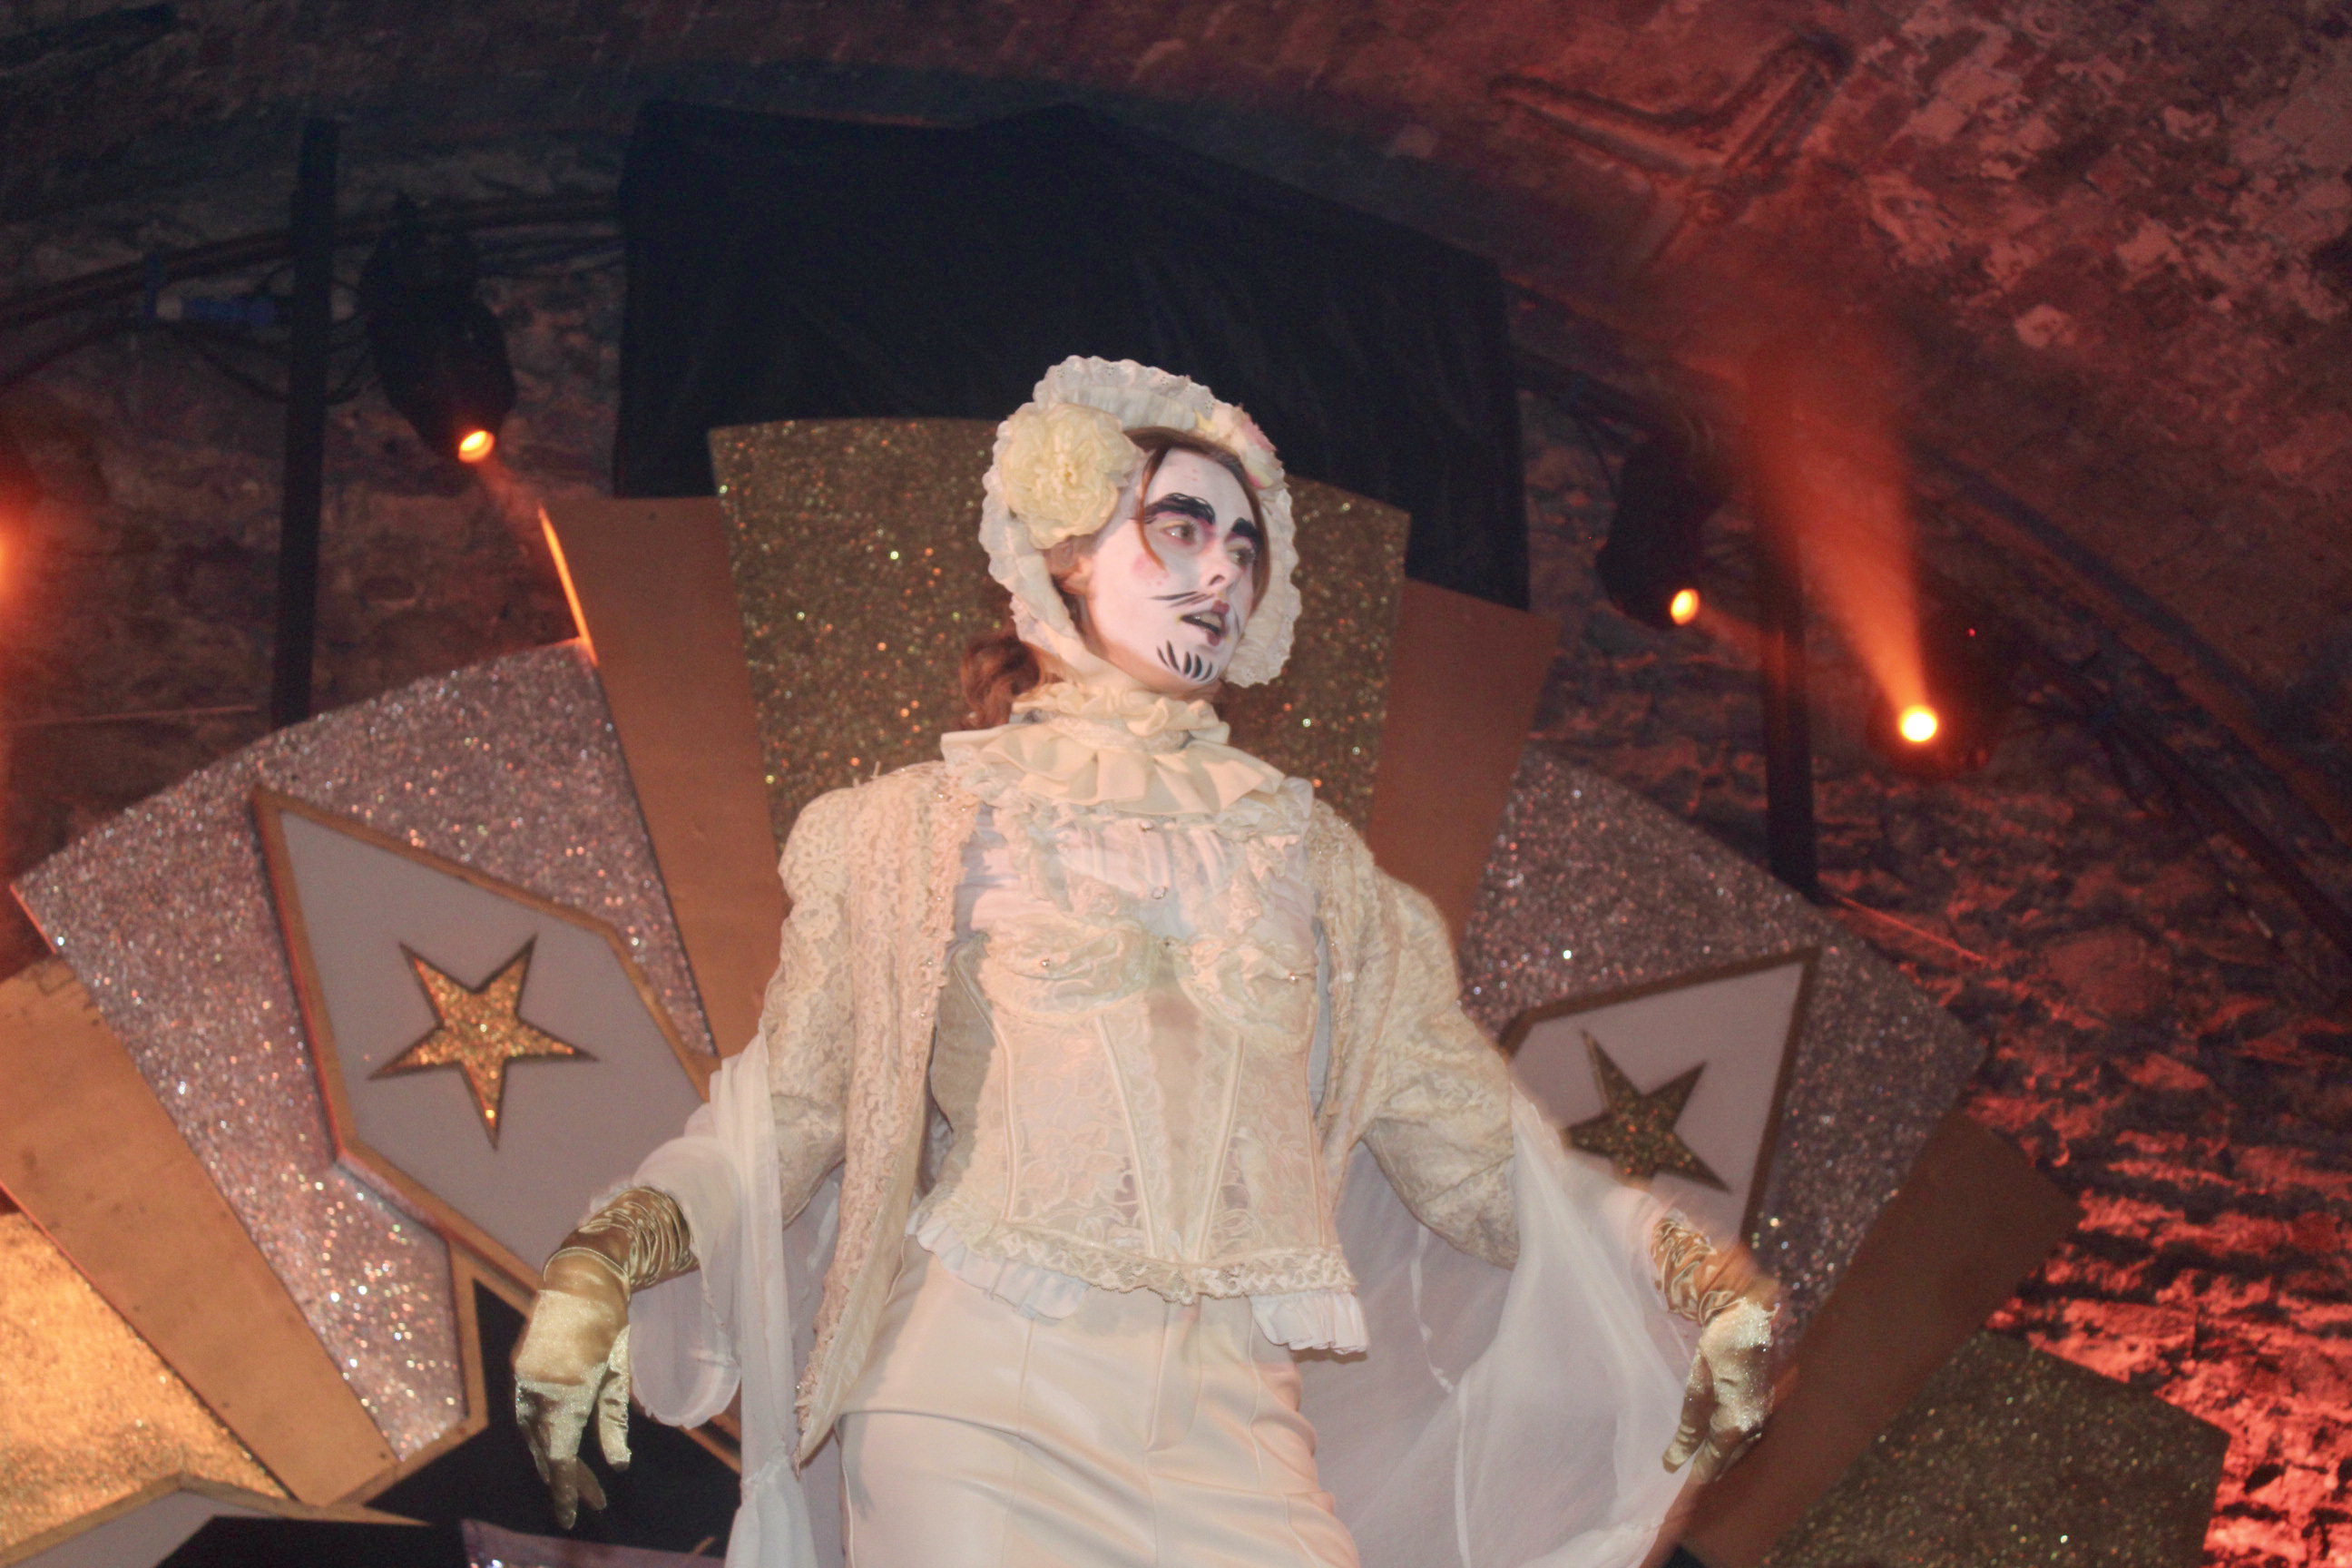 A photograph of Dionysos on stage in his cream ensemble.